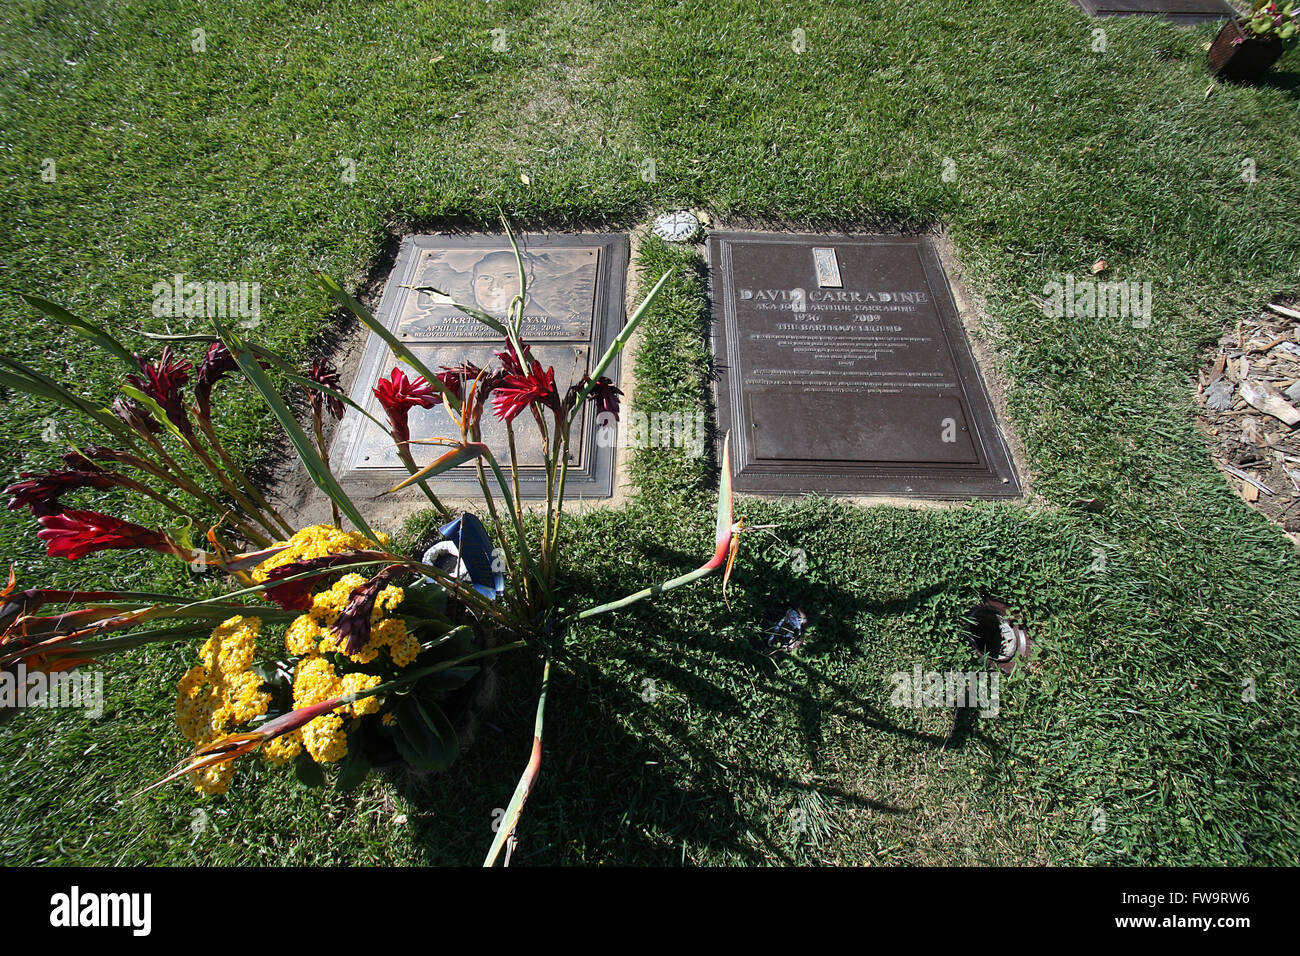 Hollywood Actor Finds Grandfather's Grave in Hungary